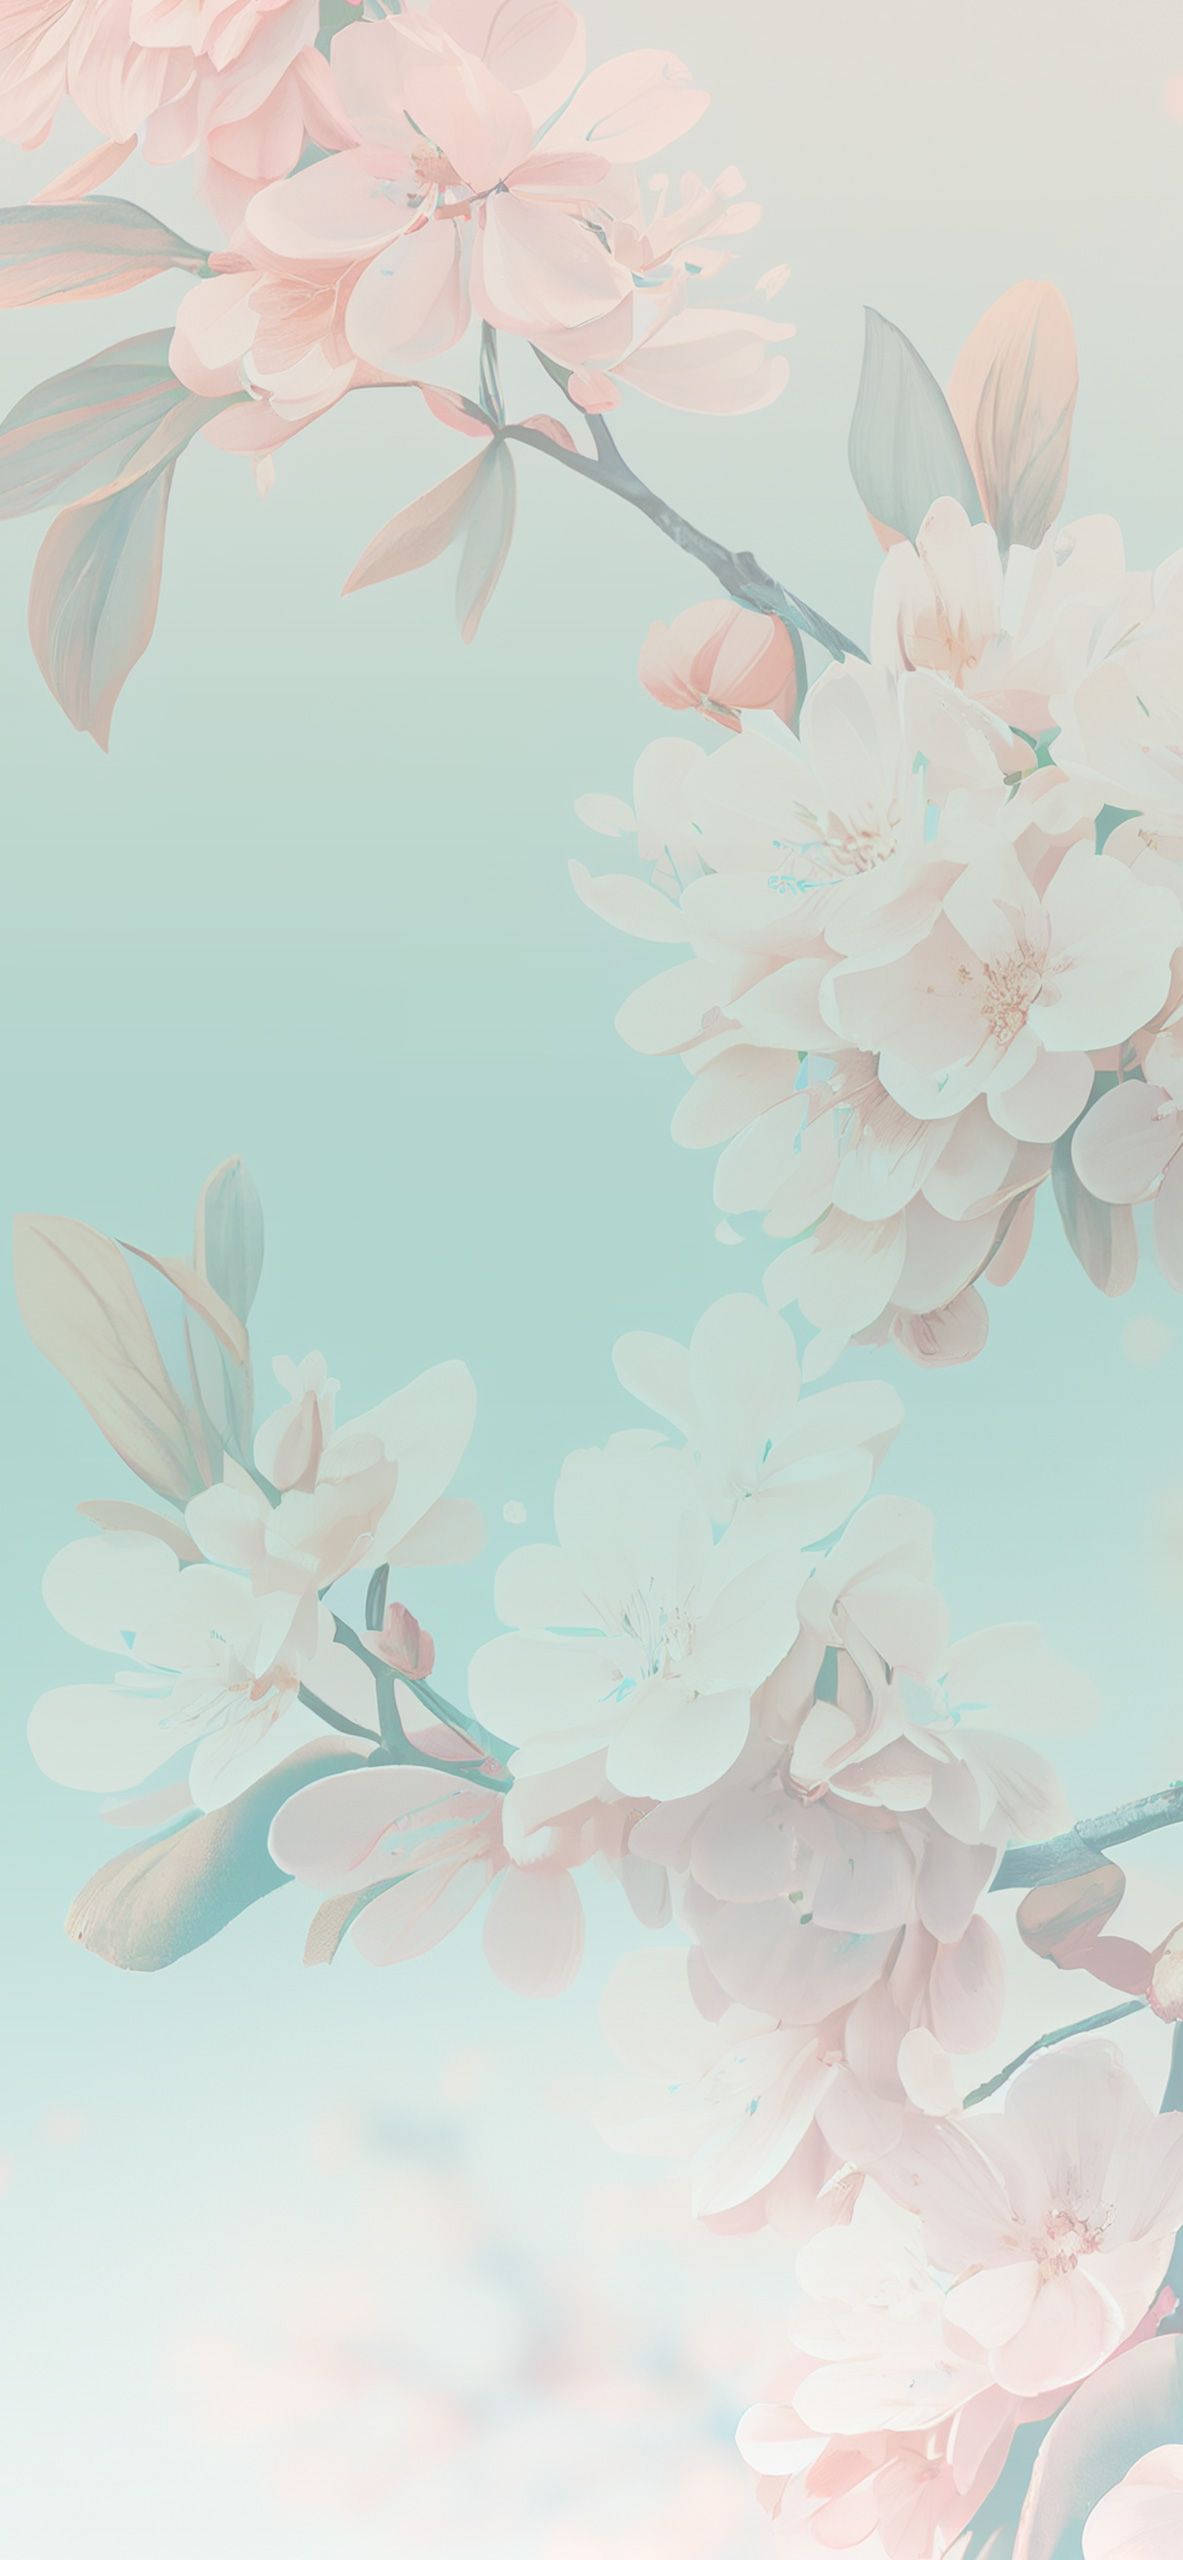 A branch of flowers in soft pastel colors on a sky blue background - Teal, cherry blossom